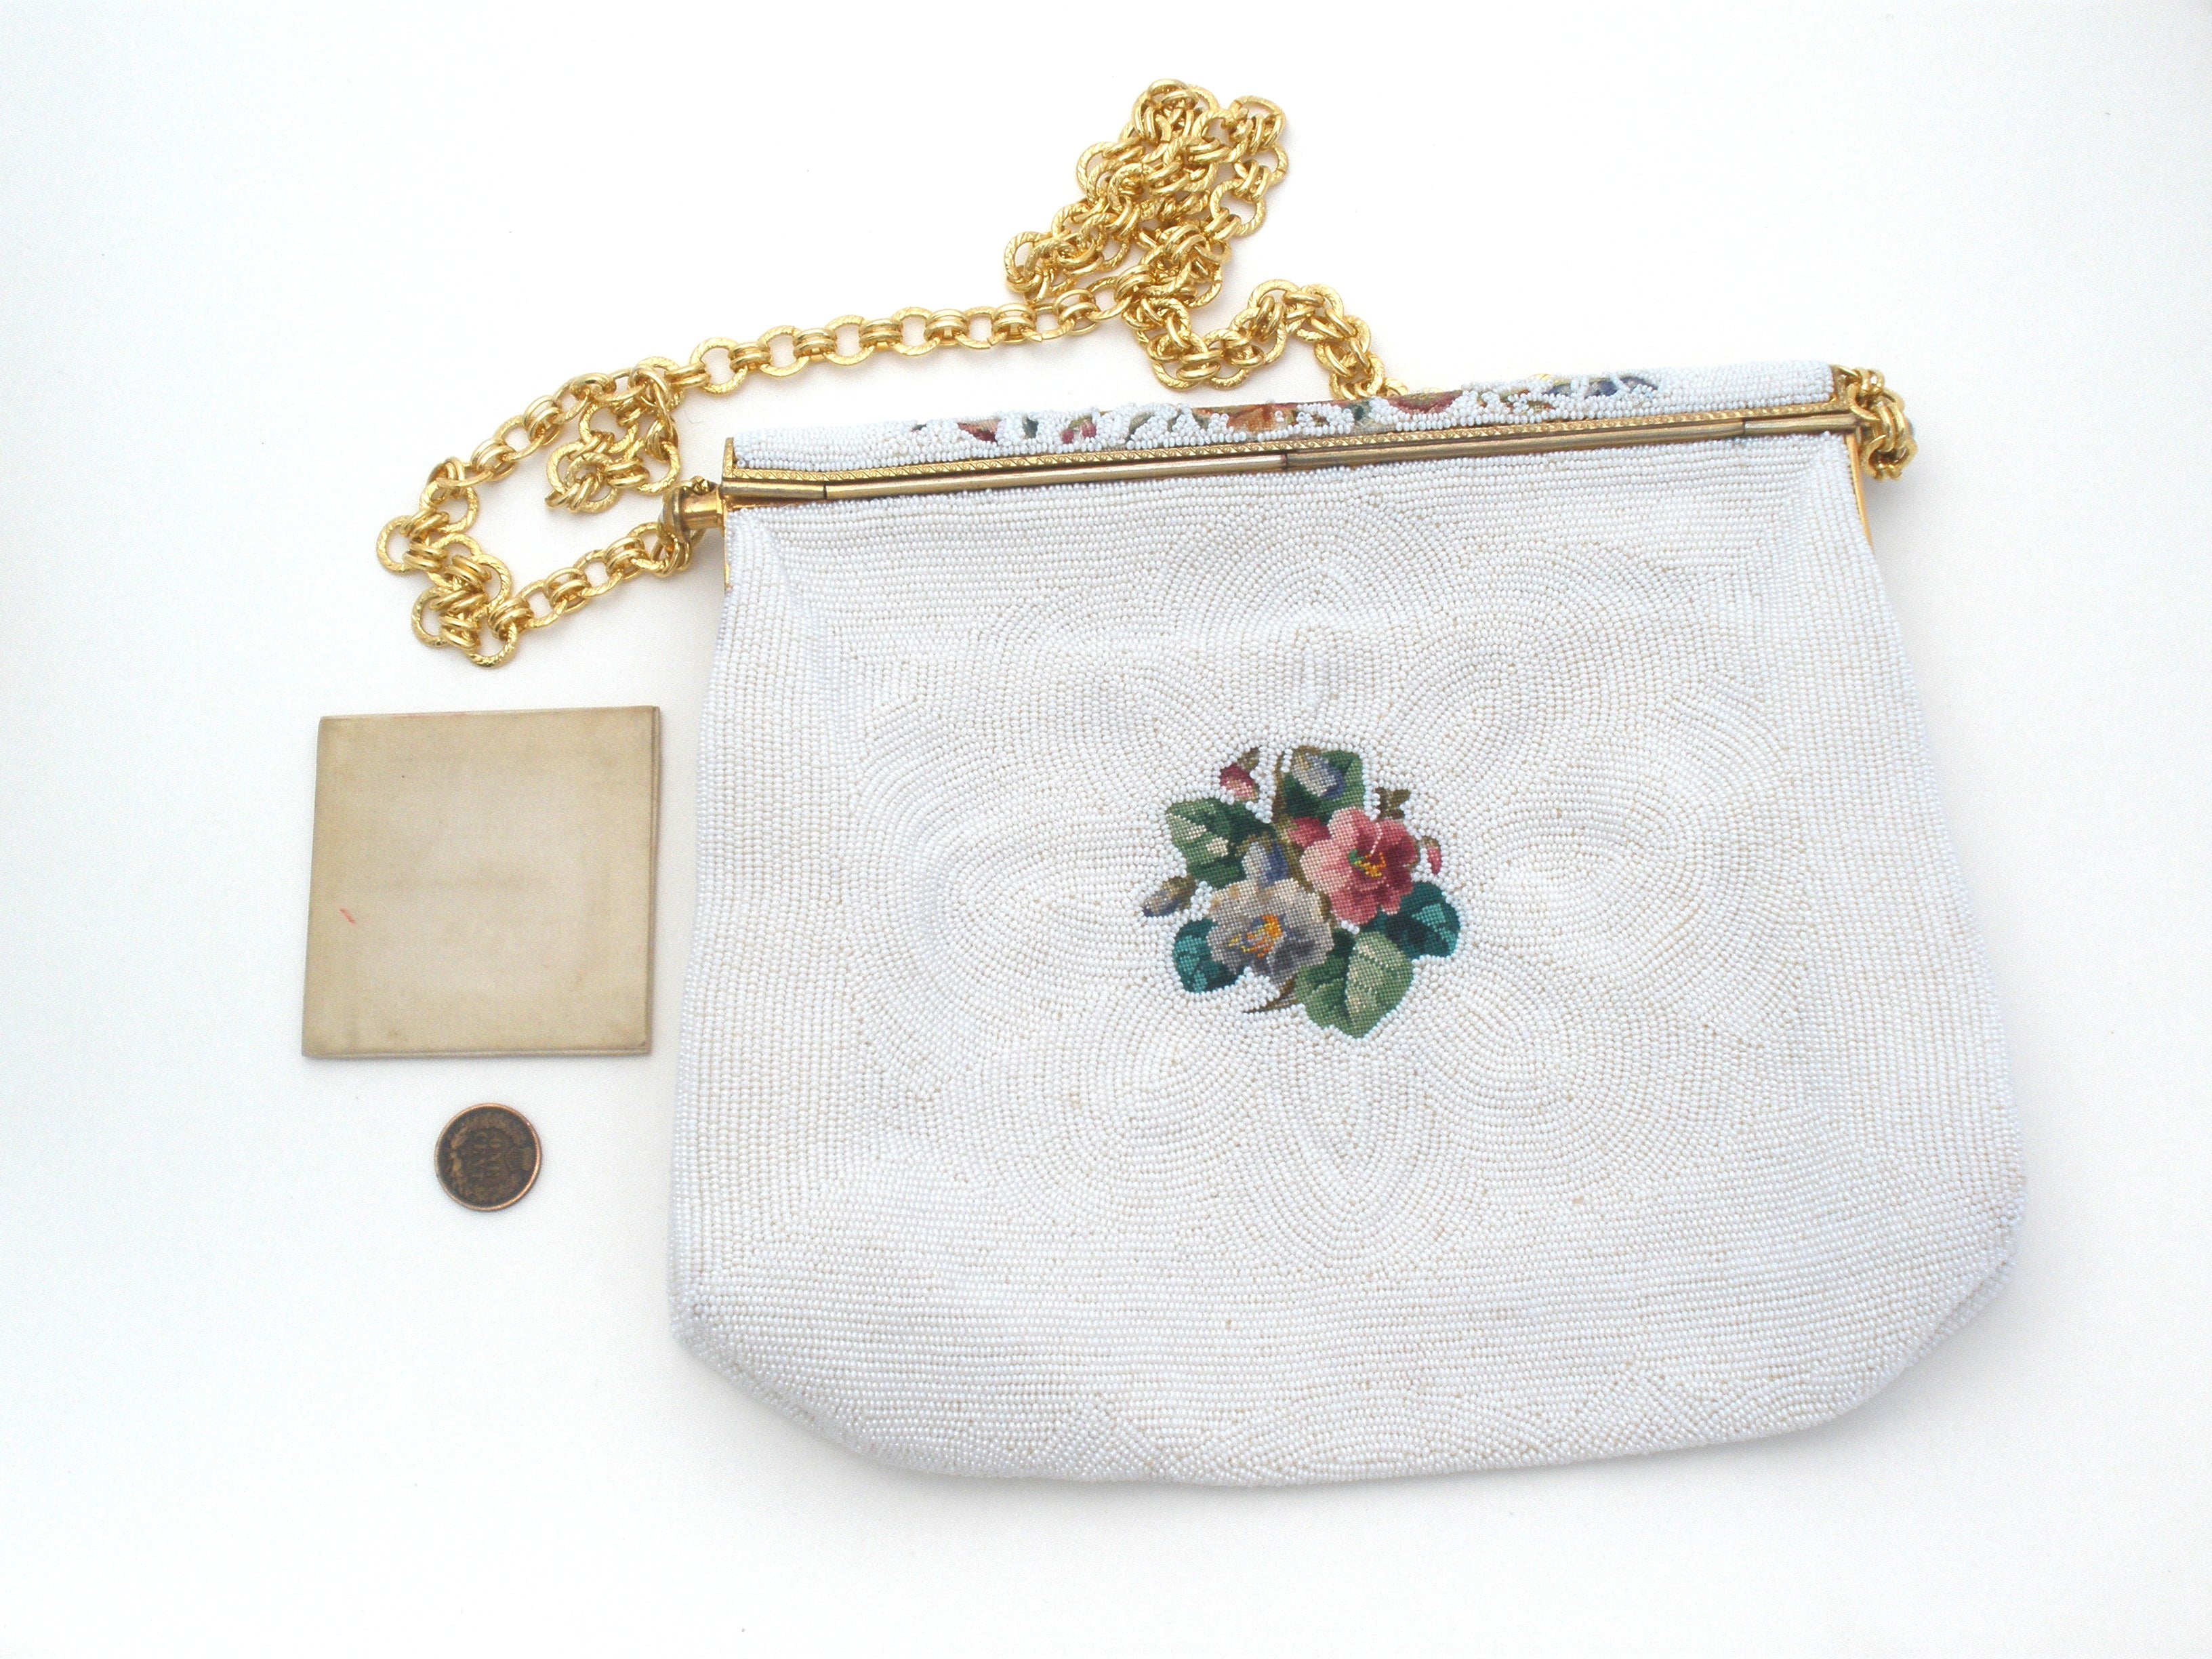 Vintage Beaded & Needlepoint Floral Purse France – The Jewelry